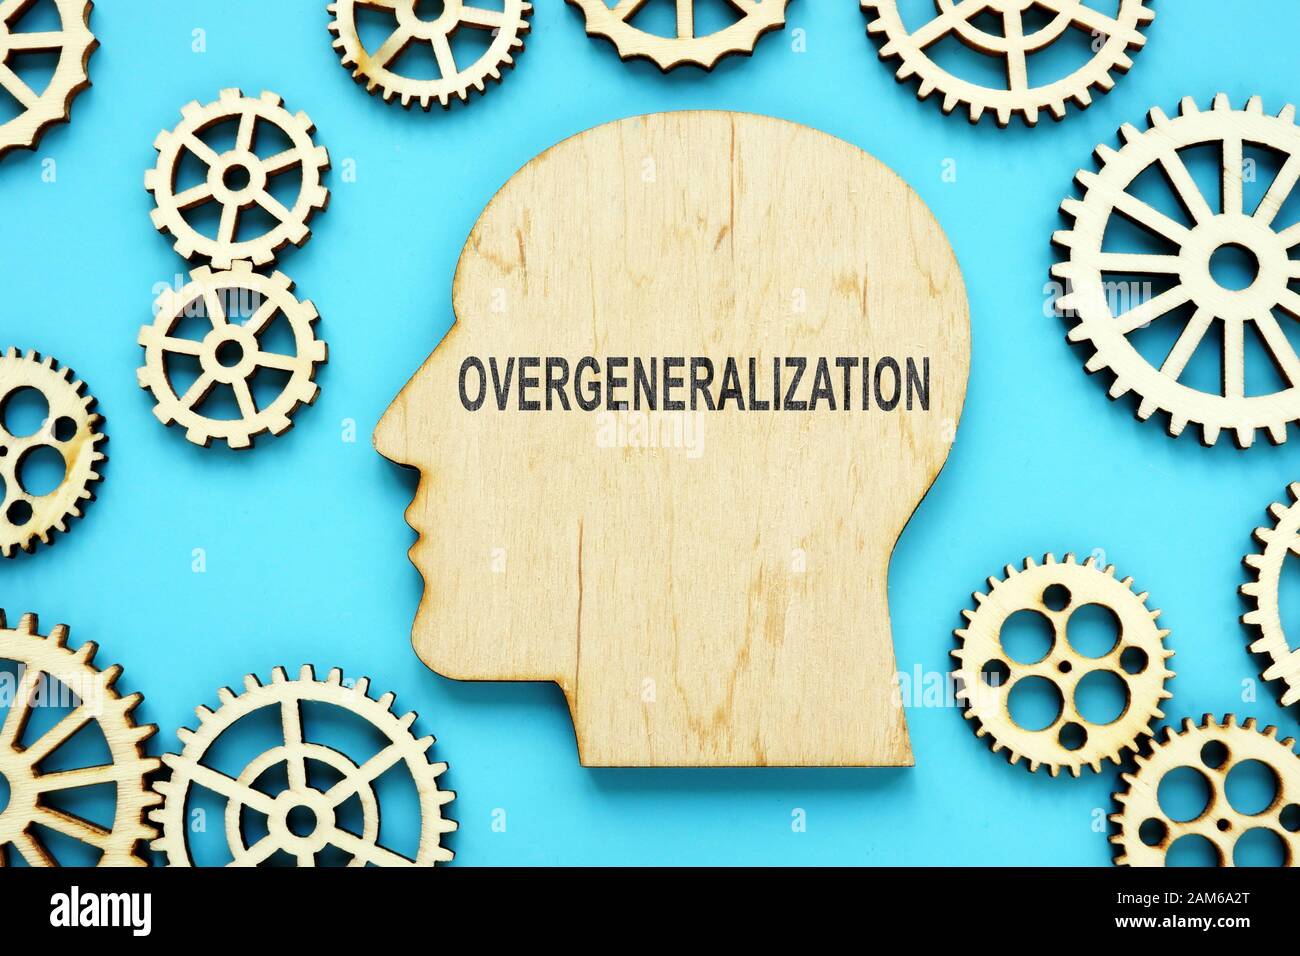 Overgeneralization word on the wooden head shape. Symptom of social anxiety concept. Stock Photo